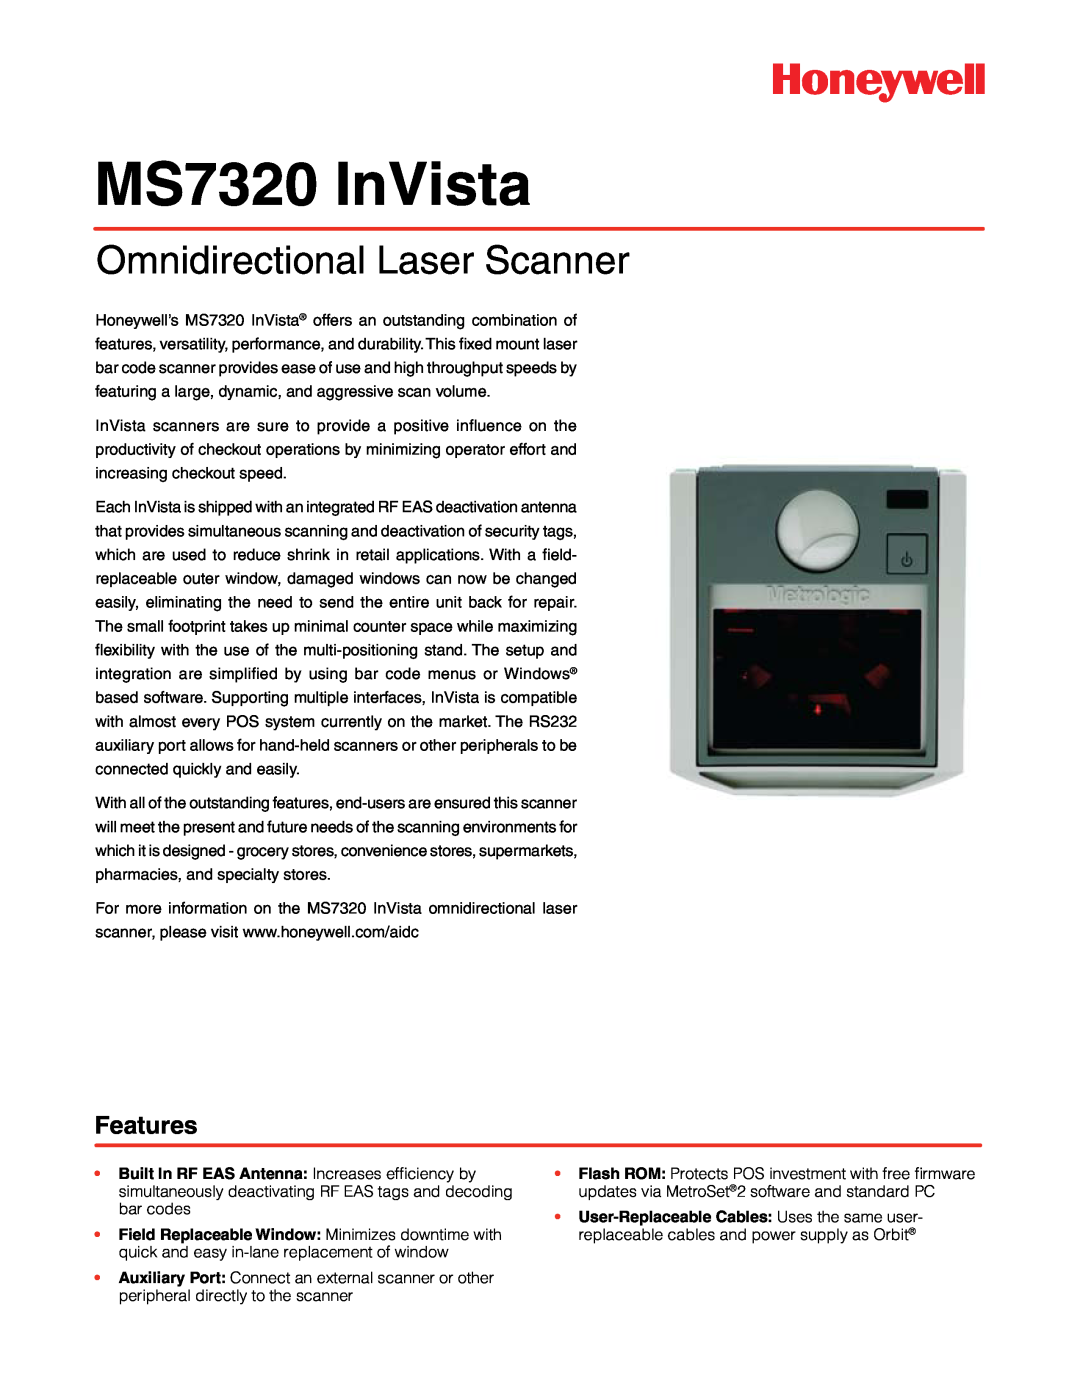 Honeywell MS7320 InVista manual Omnidirectional Laser Scanner, Features 